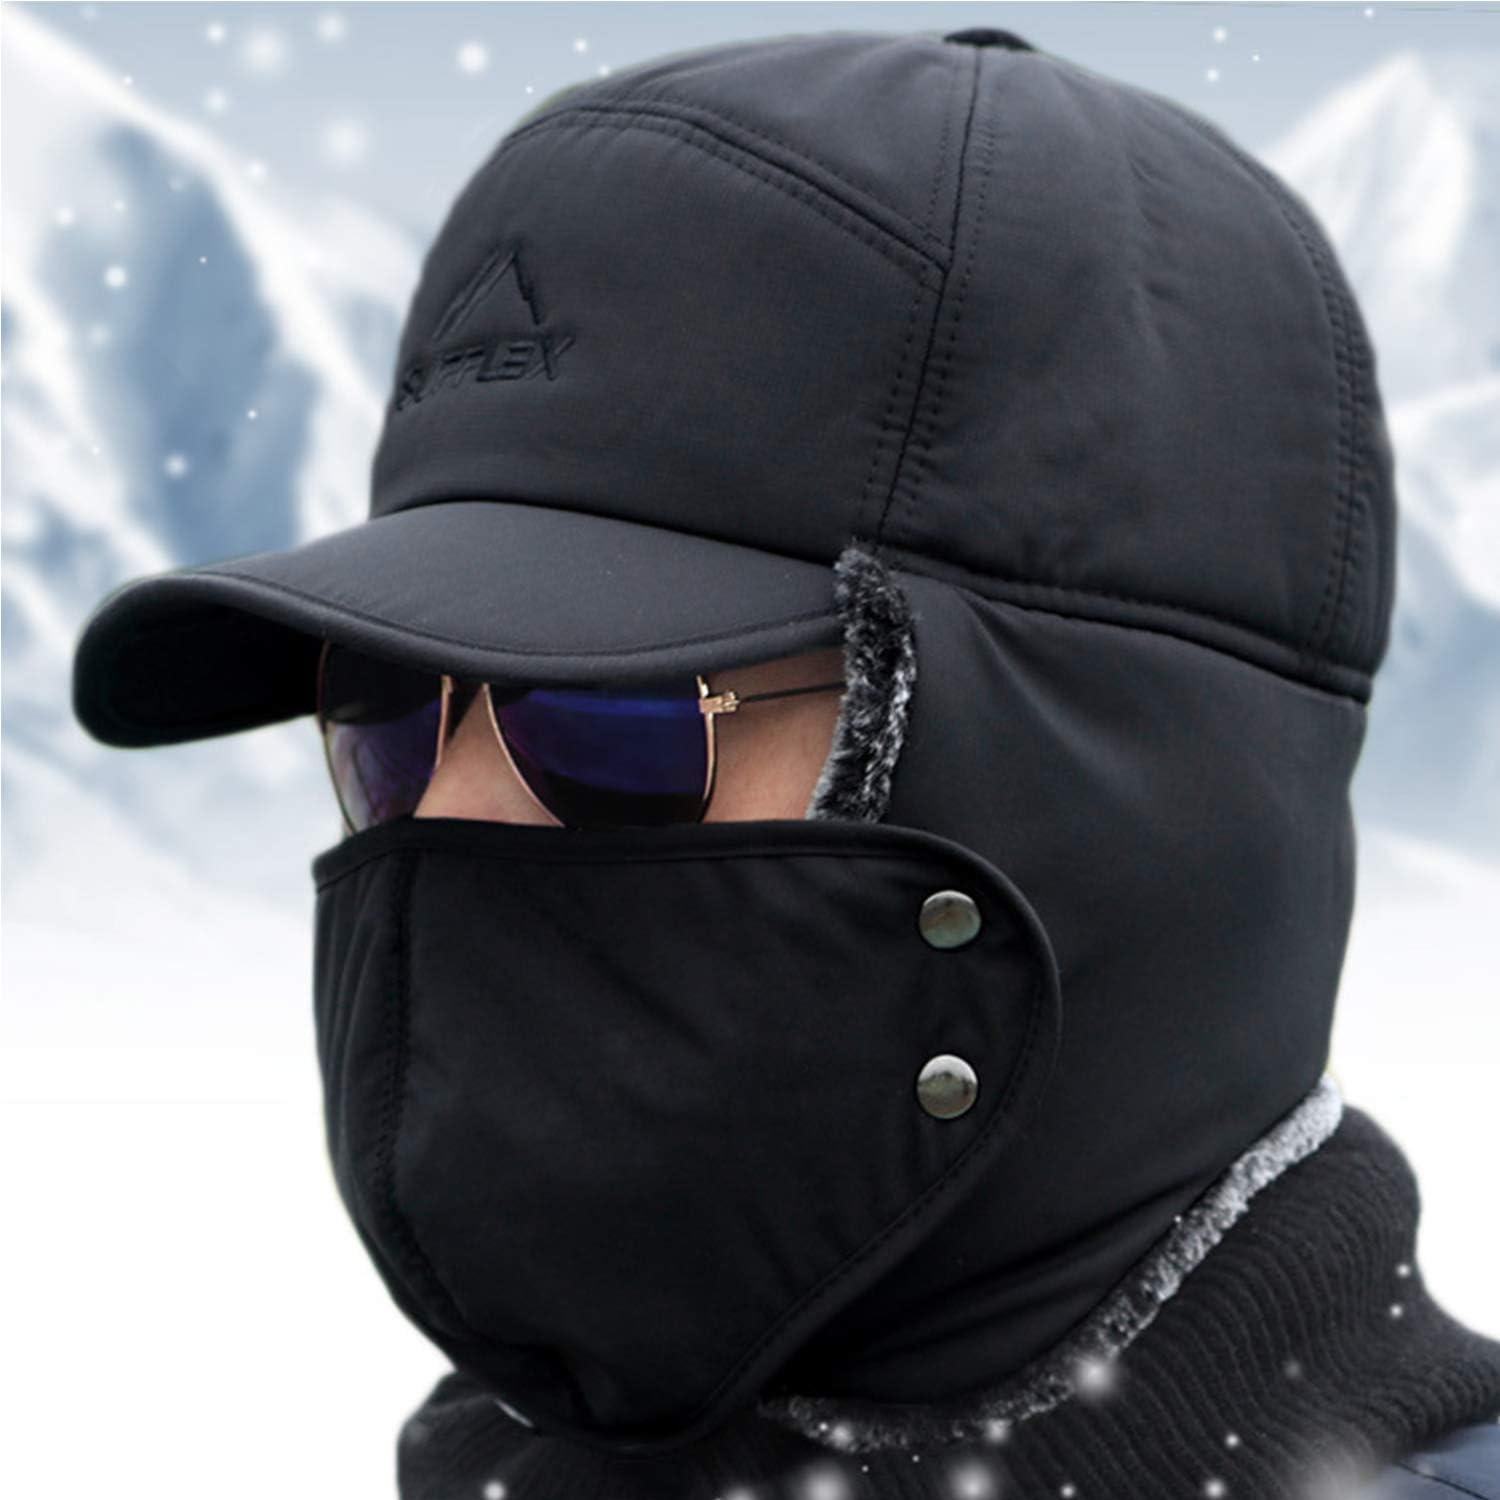 Mens Water Proof Thermal Trapper Hat With Ear Flaps (Black